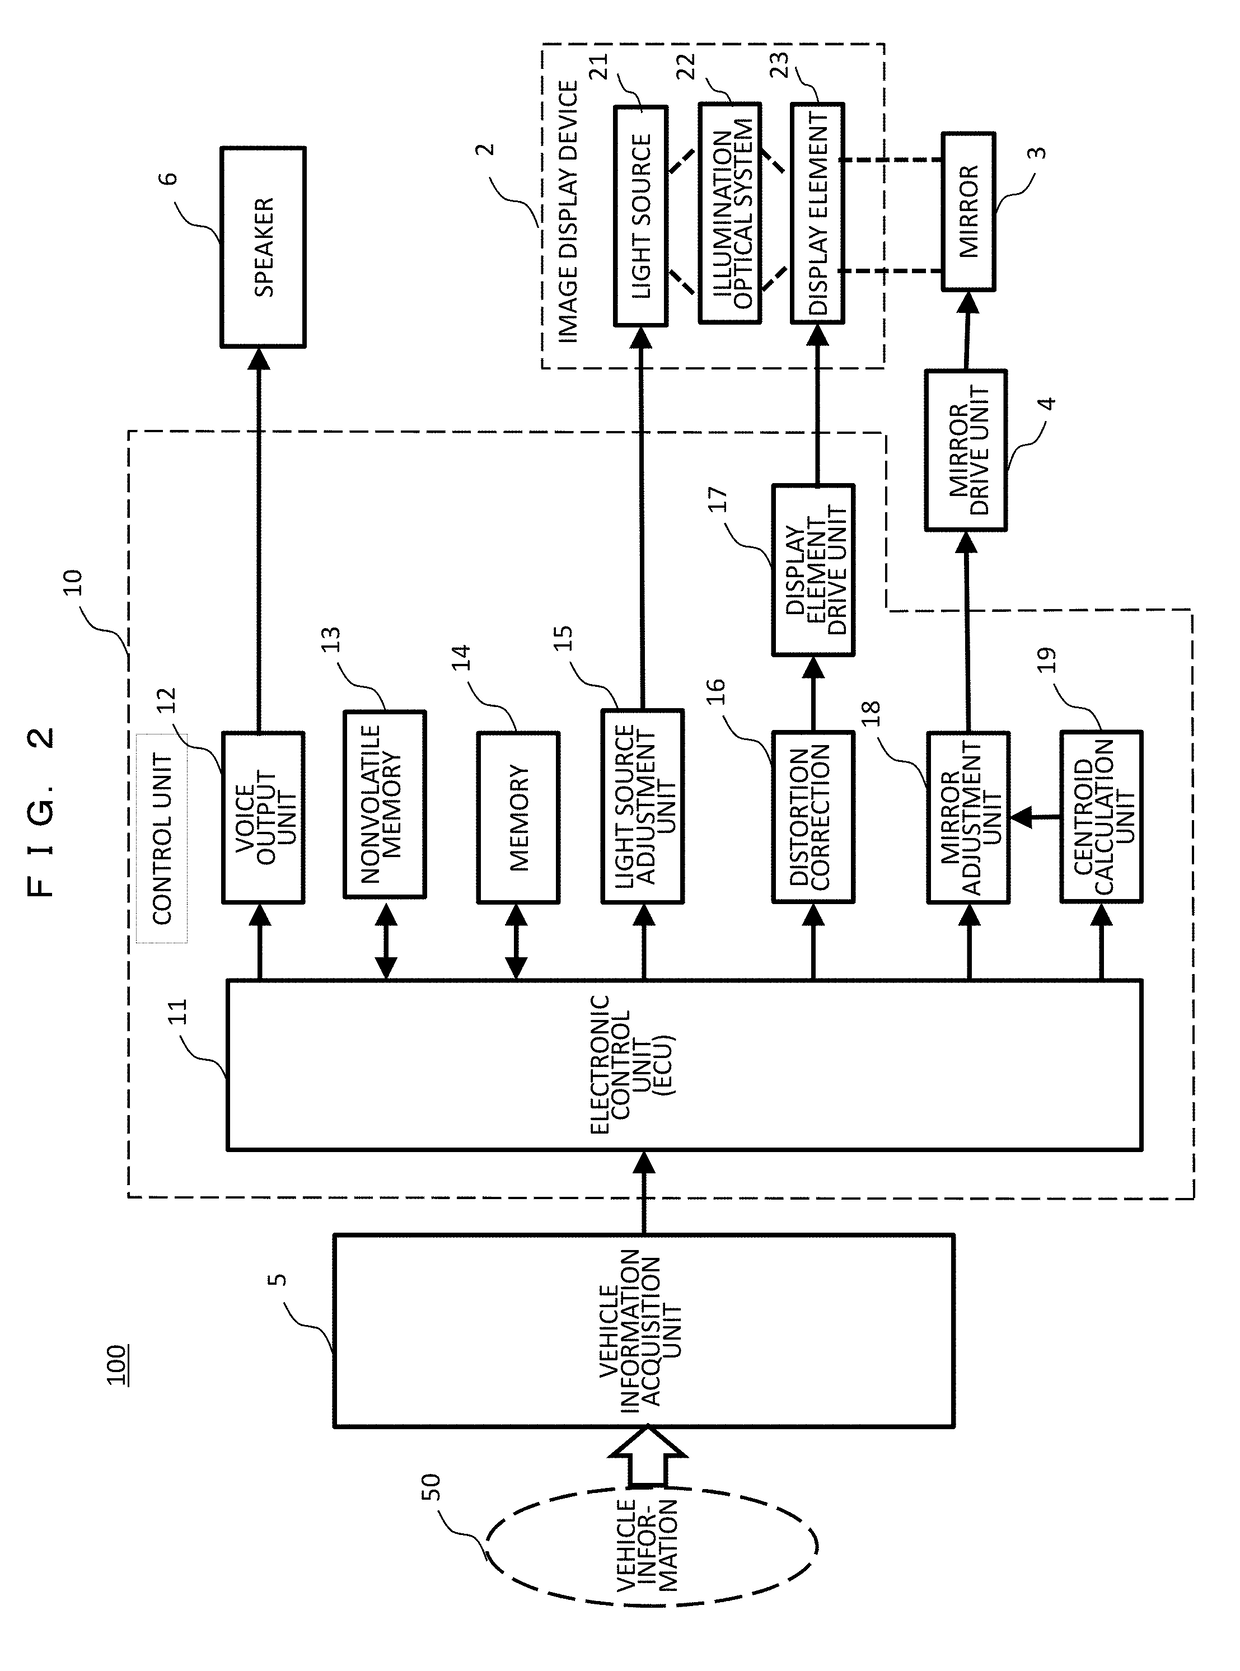 Image display apparatus for vehicle